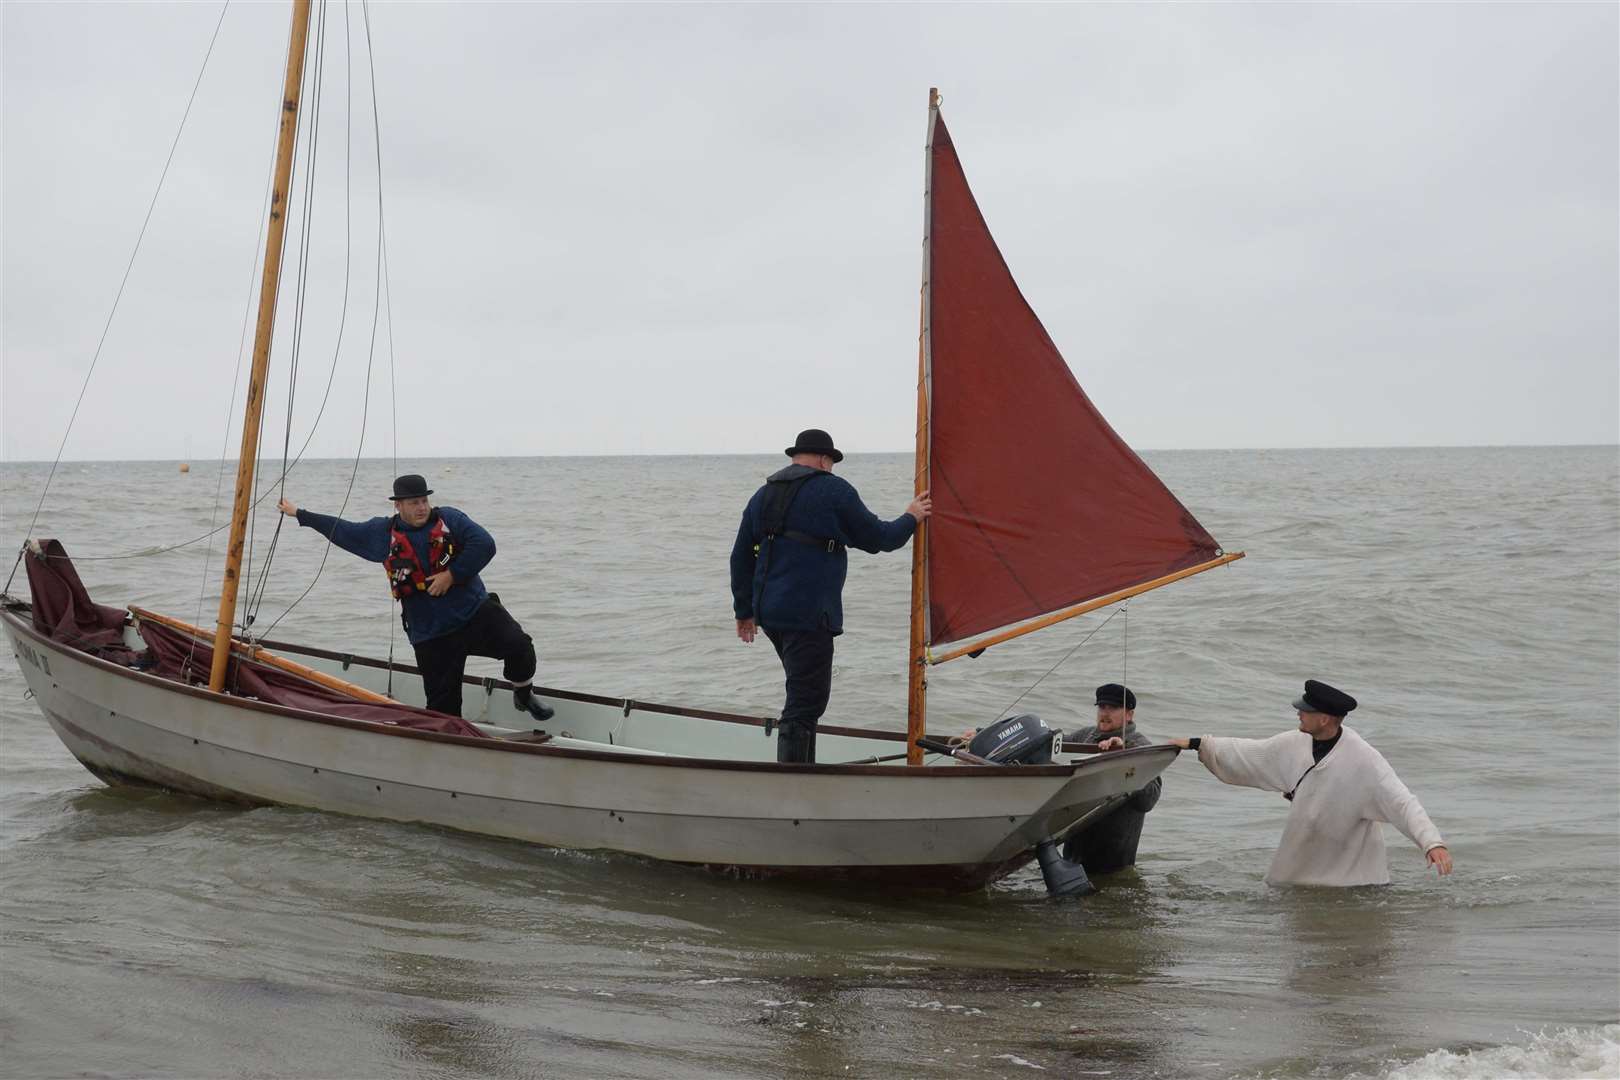 The landing of the oysters in a traditional smack remains a tradition in Whitstable